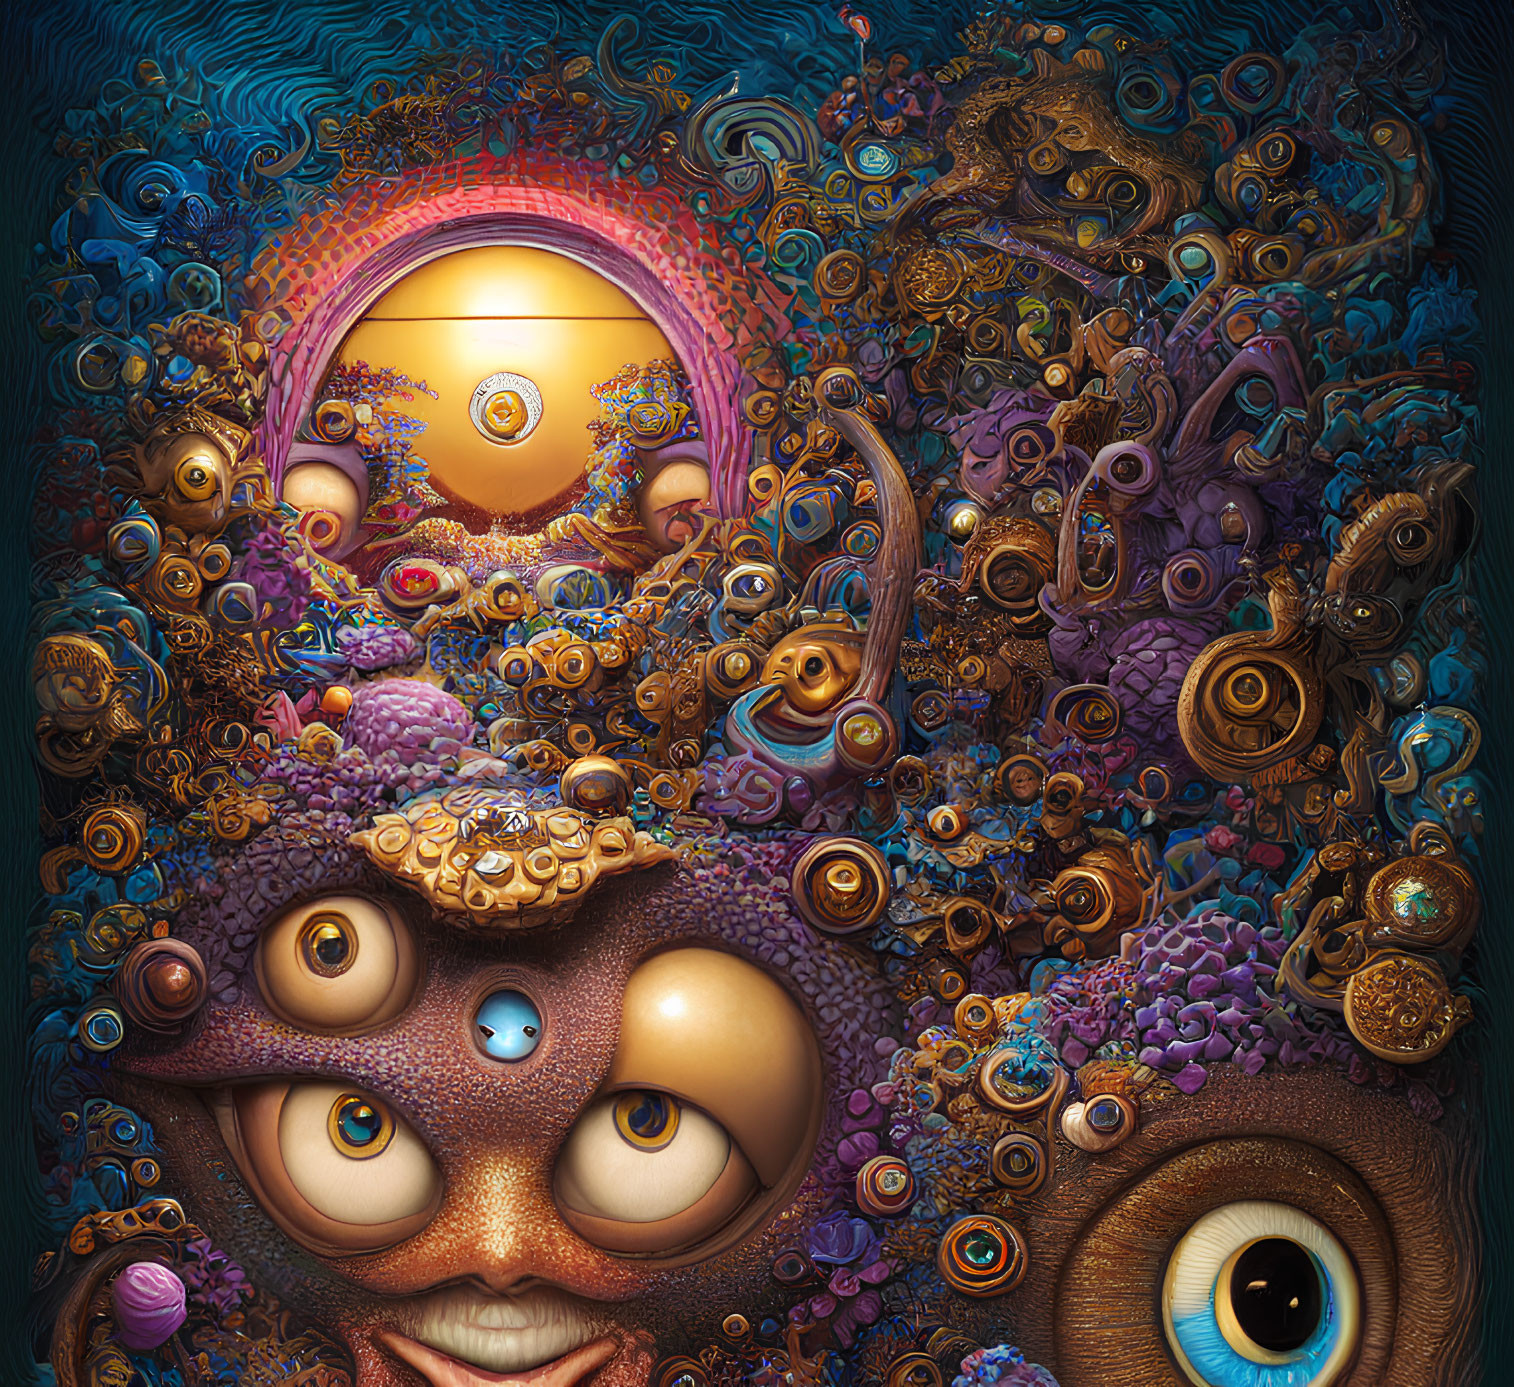 Surreal artwork featuring multiple eyes and faces in swirling patterns